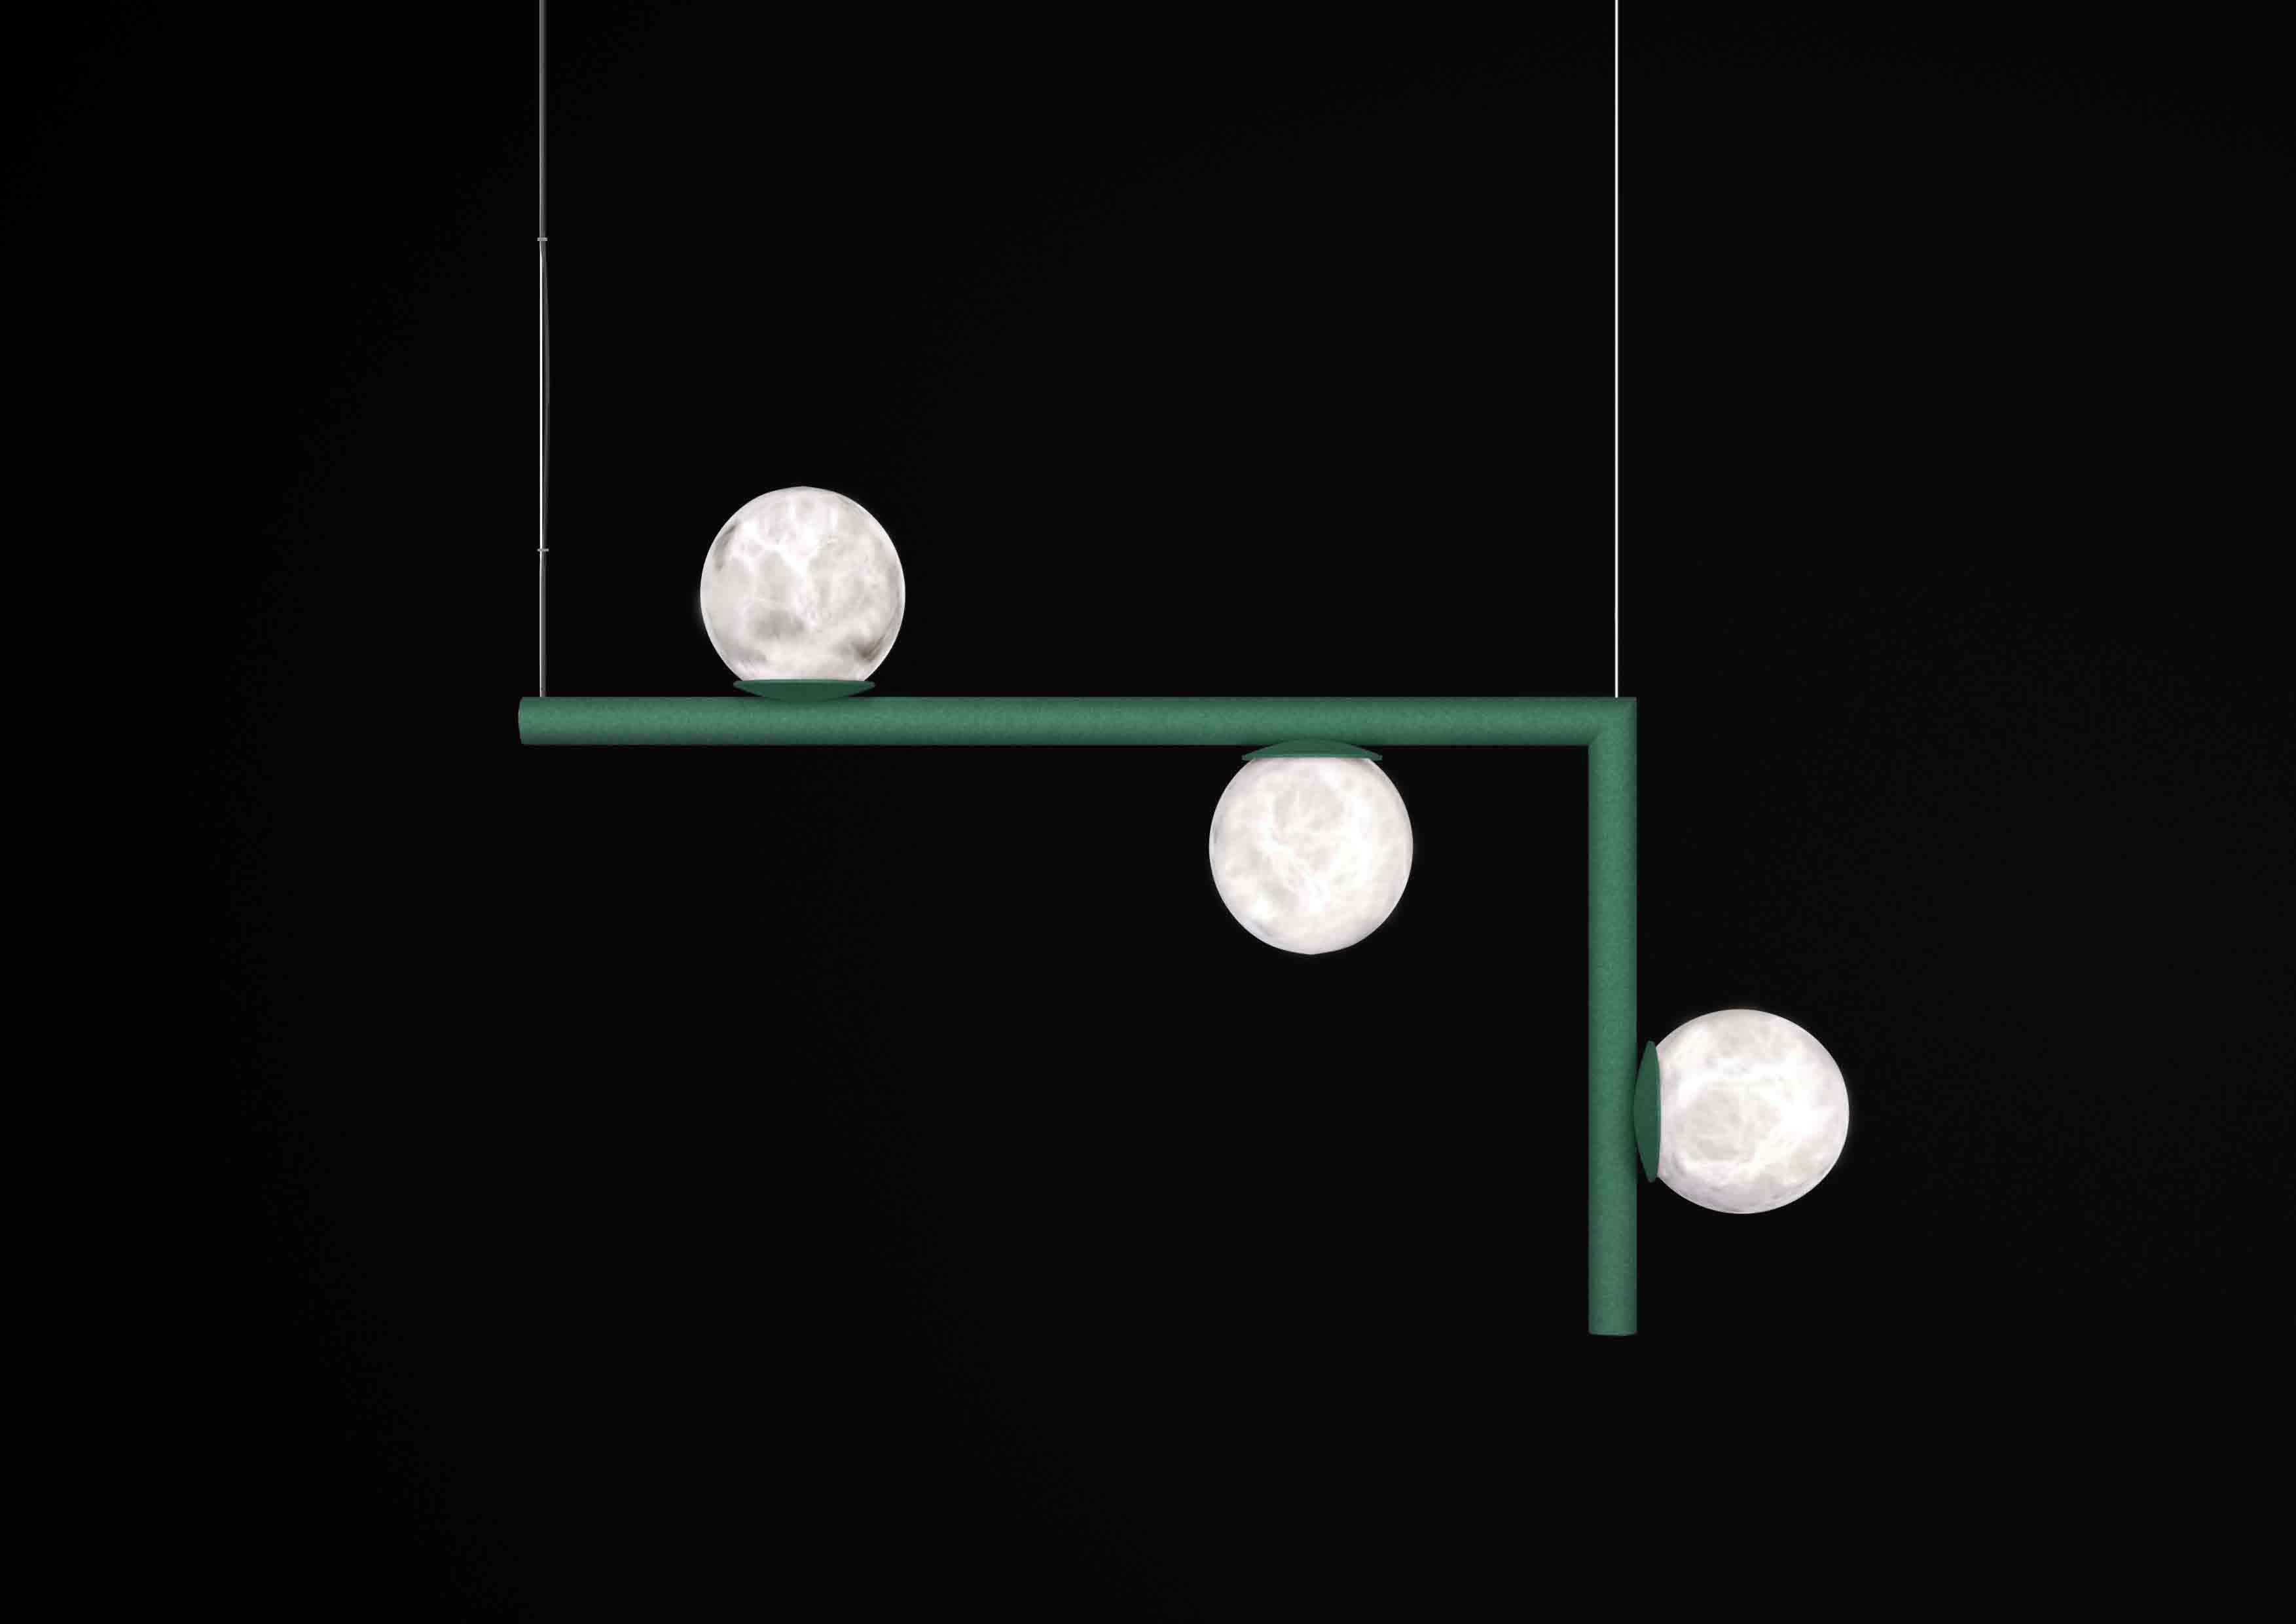 Ofione 2 Freedom Green Metal Pendant Lamp by Alabastro Italiano
Dimensions: D 14 x W 85 x H 55 cm.
Materials: White alabaster and metal.

Available in different finishes: Shiny Silver, Bronze, Brushed Brass, Ruggine of Florence, Brushed Burnished,